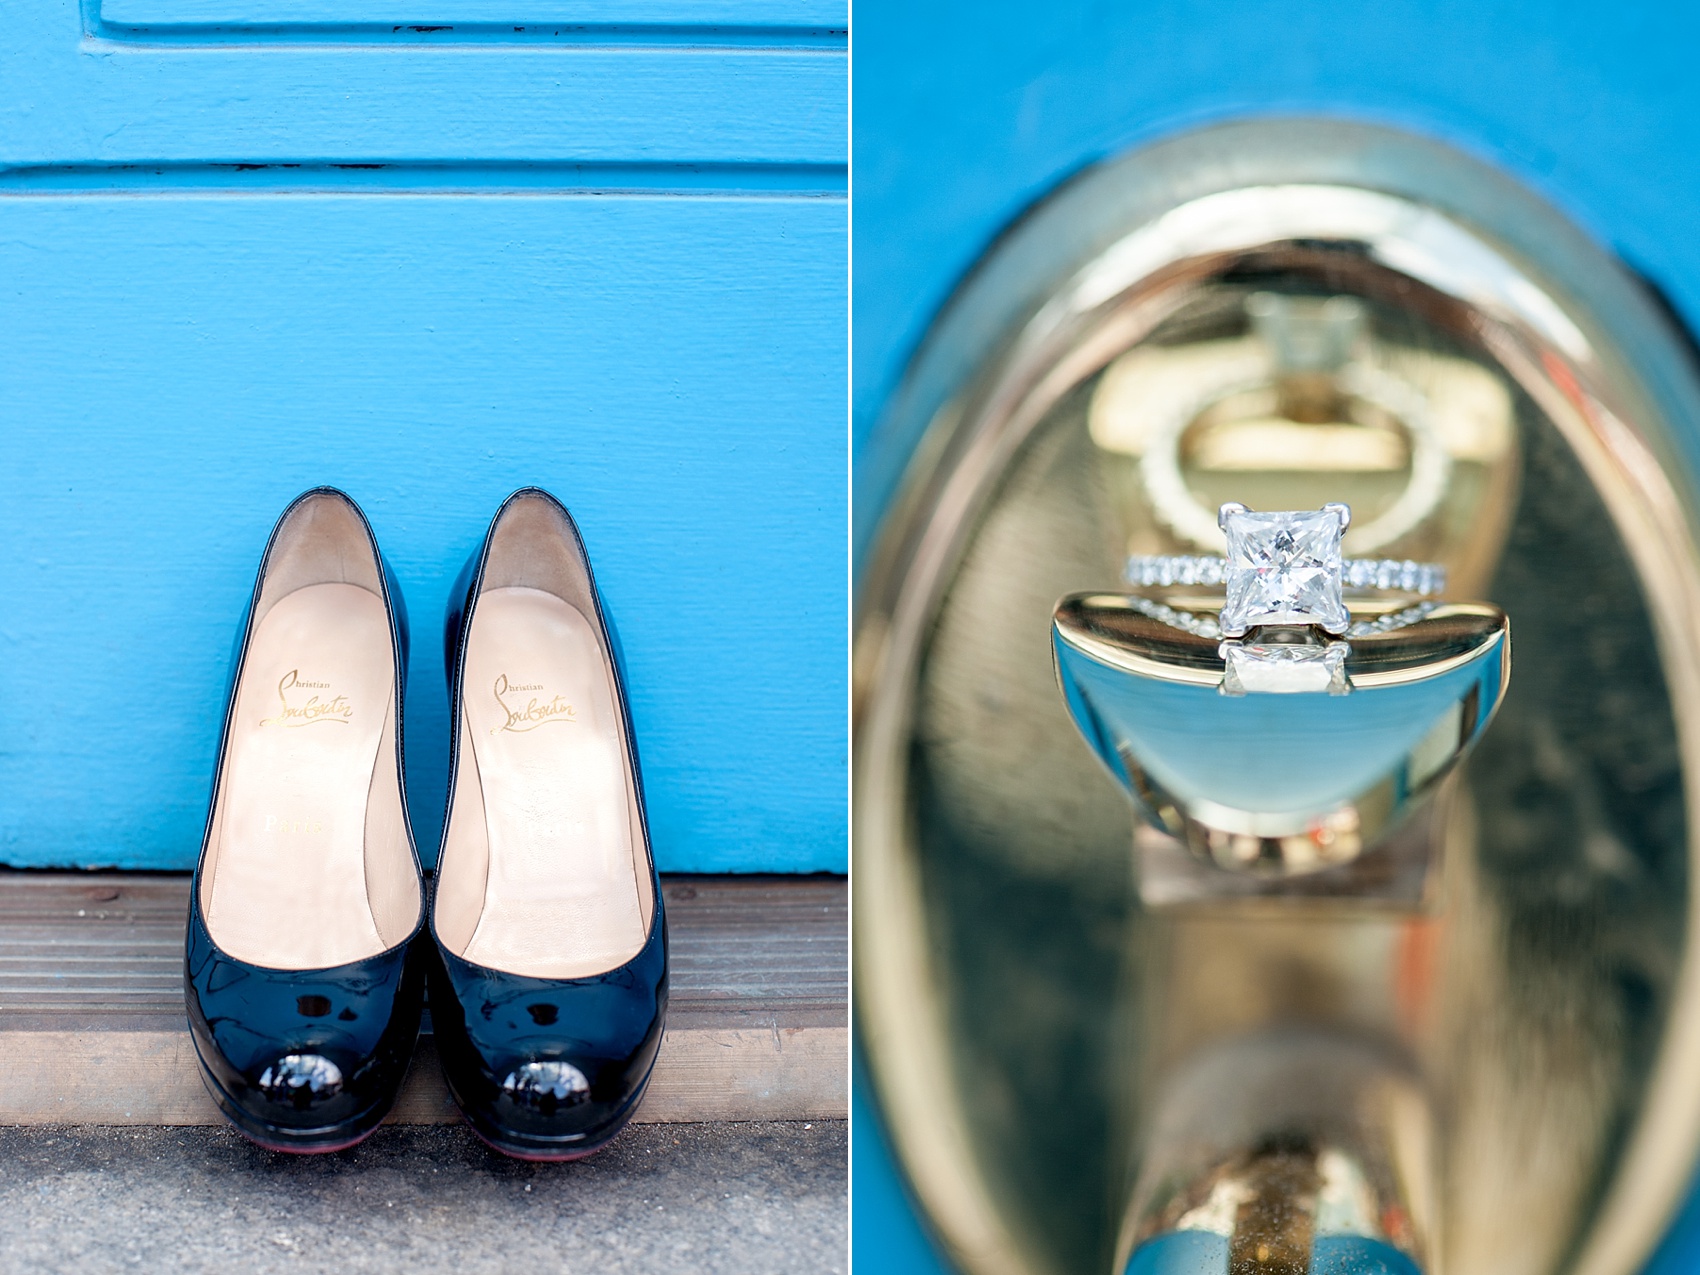 South Street Seaport engagement session in NYC. Photos by Mikkel Paige Photography. #nyc #southstreetseaport #louboutin